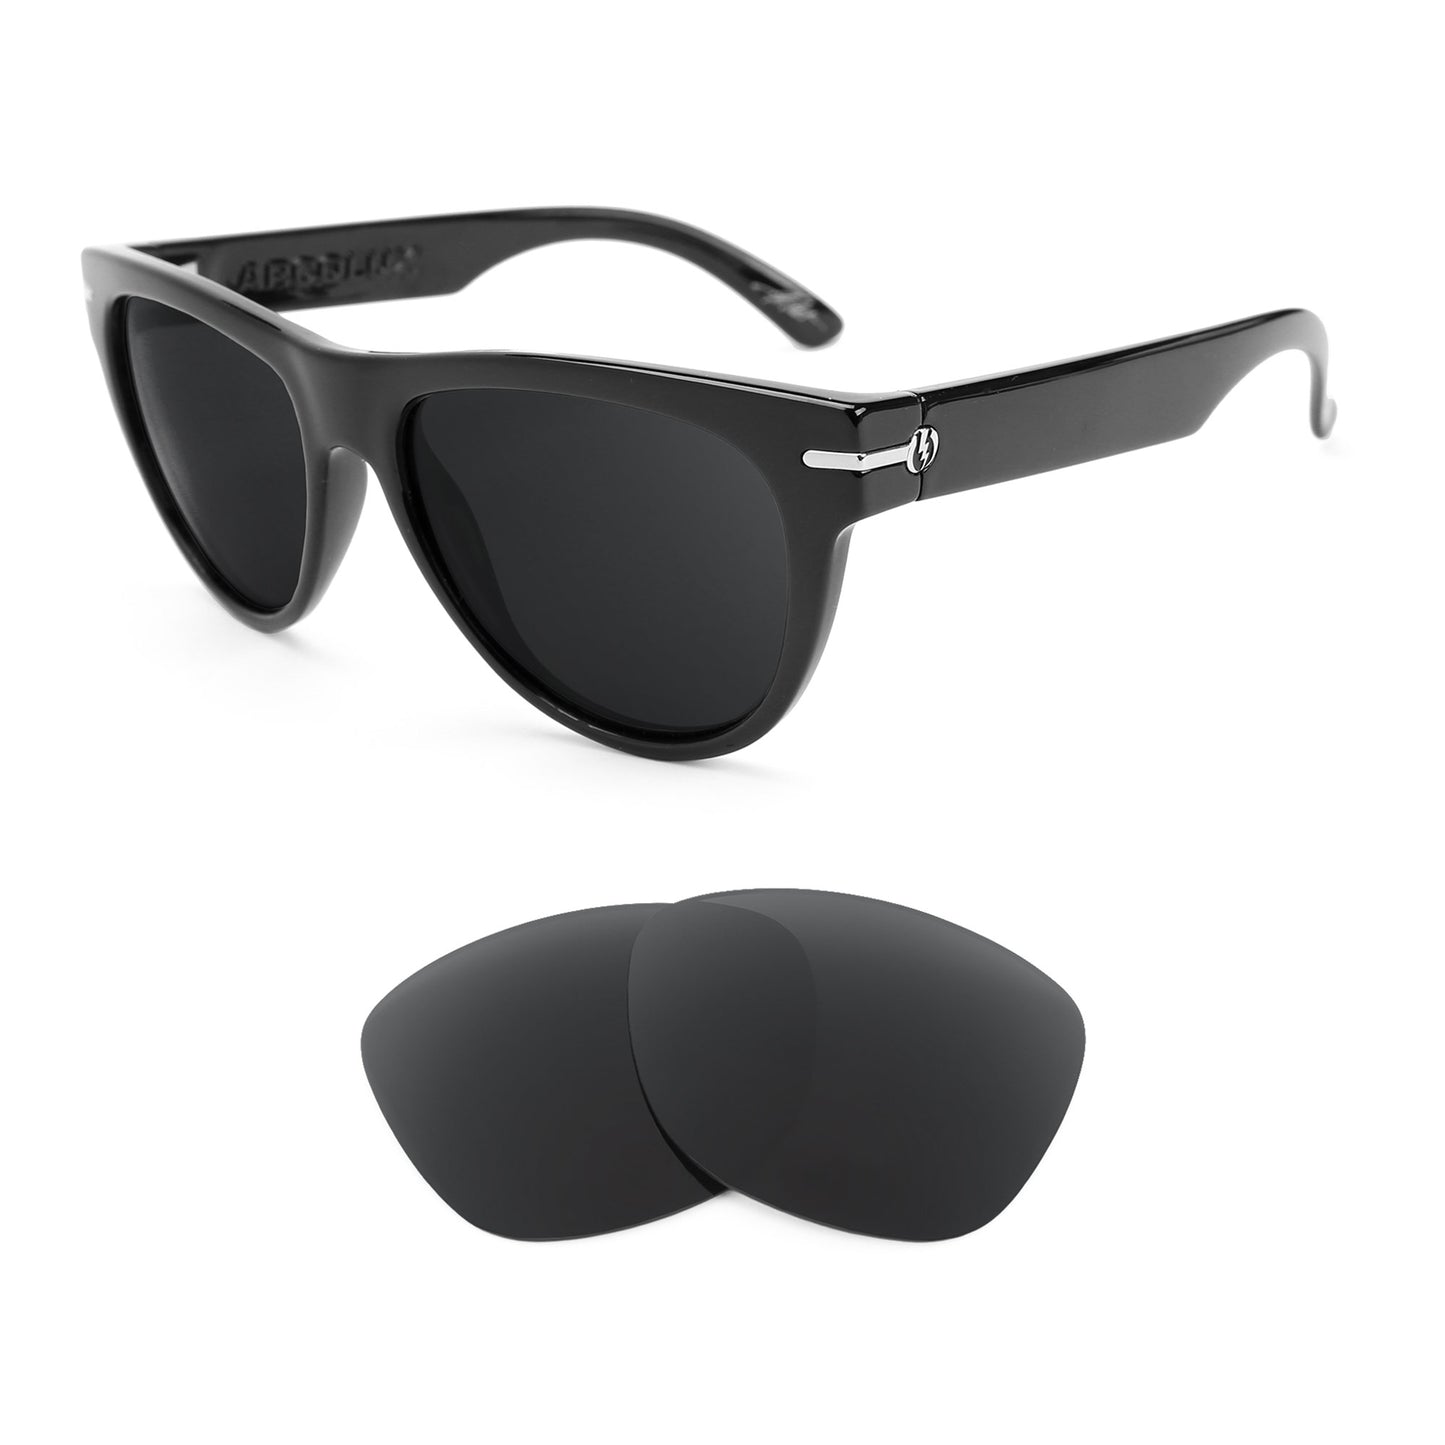 Electric Arcolux sunglasses with replacement lenses